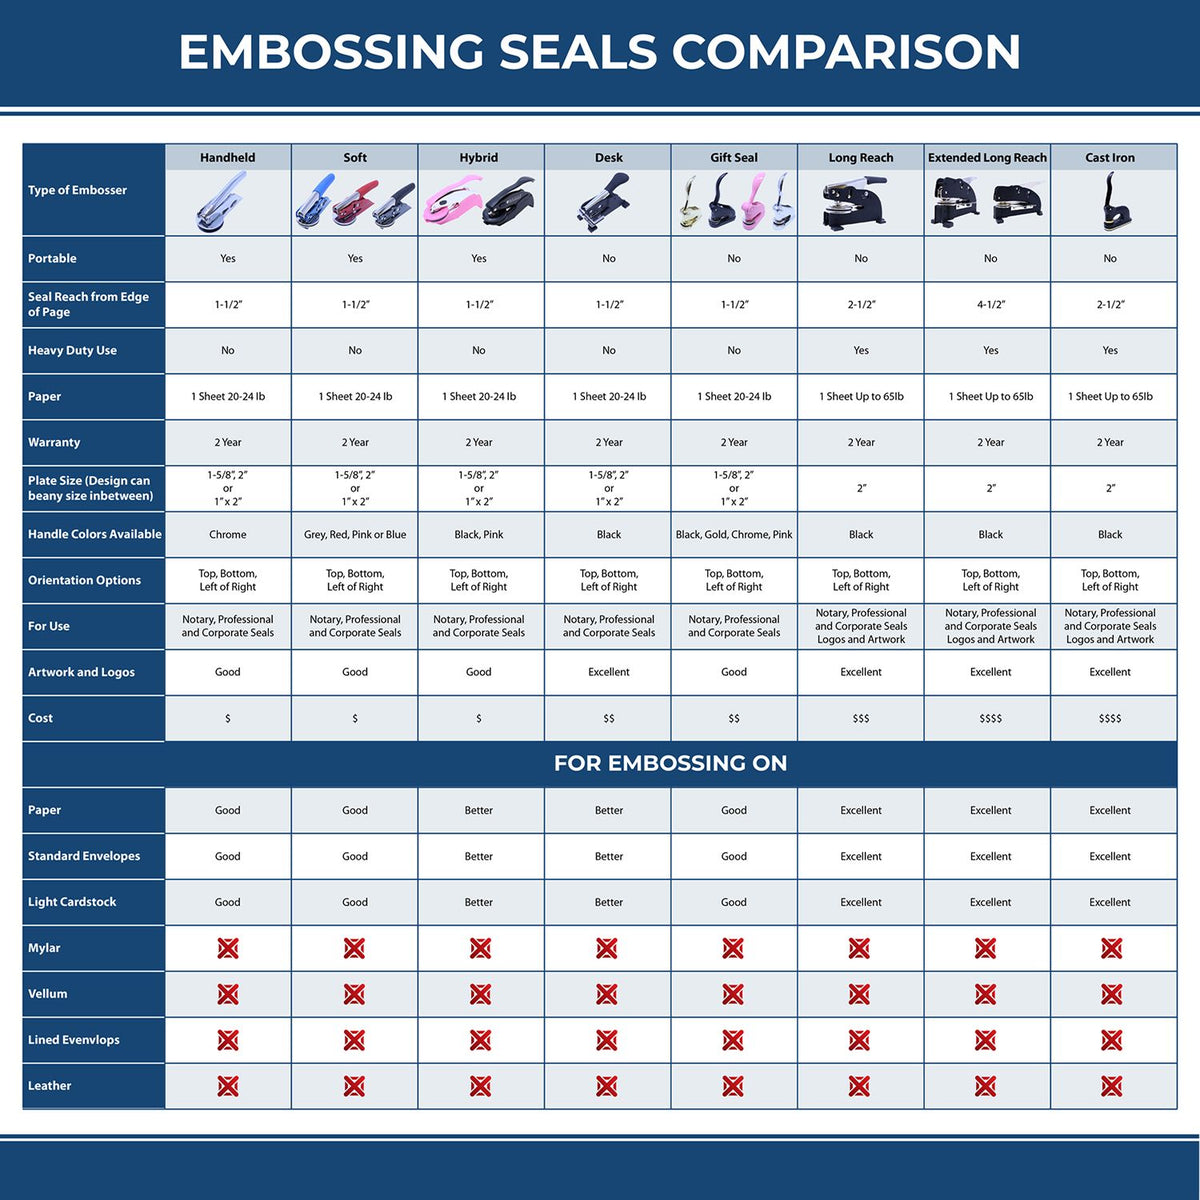 A comparison chart for the different types of mount models available for the Soft Pocket Maryland Landscape Architect Embosser.